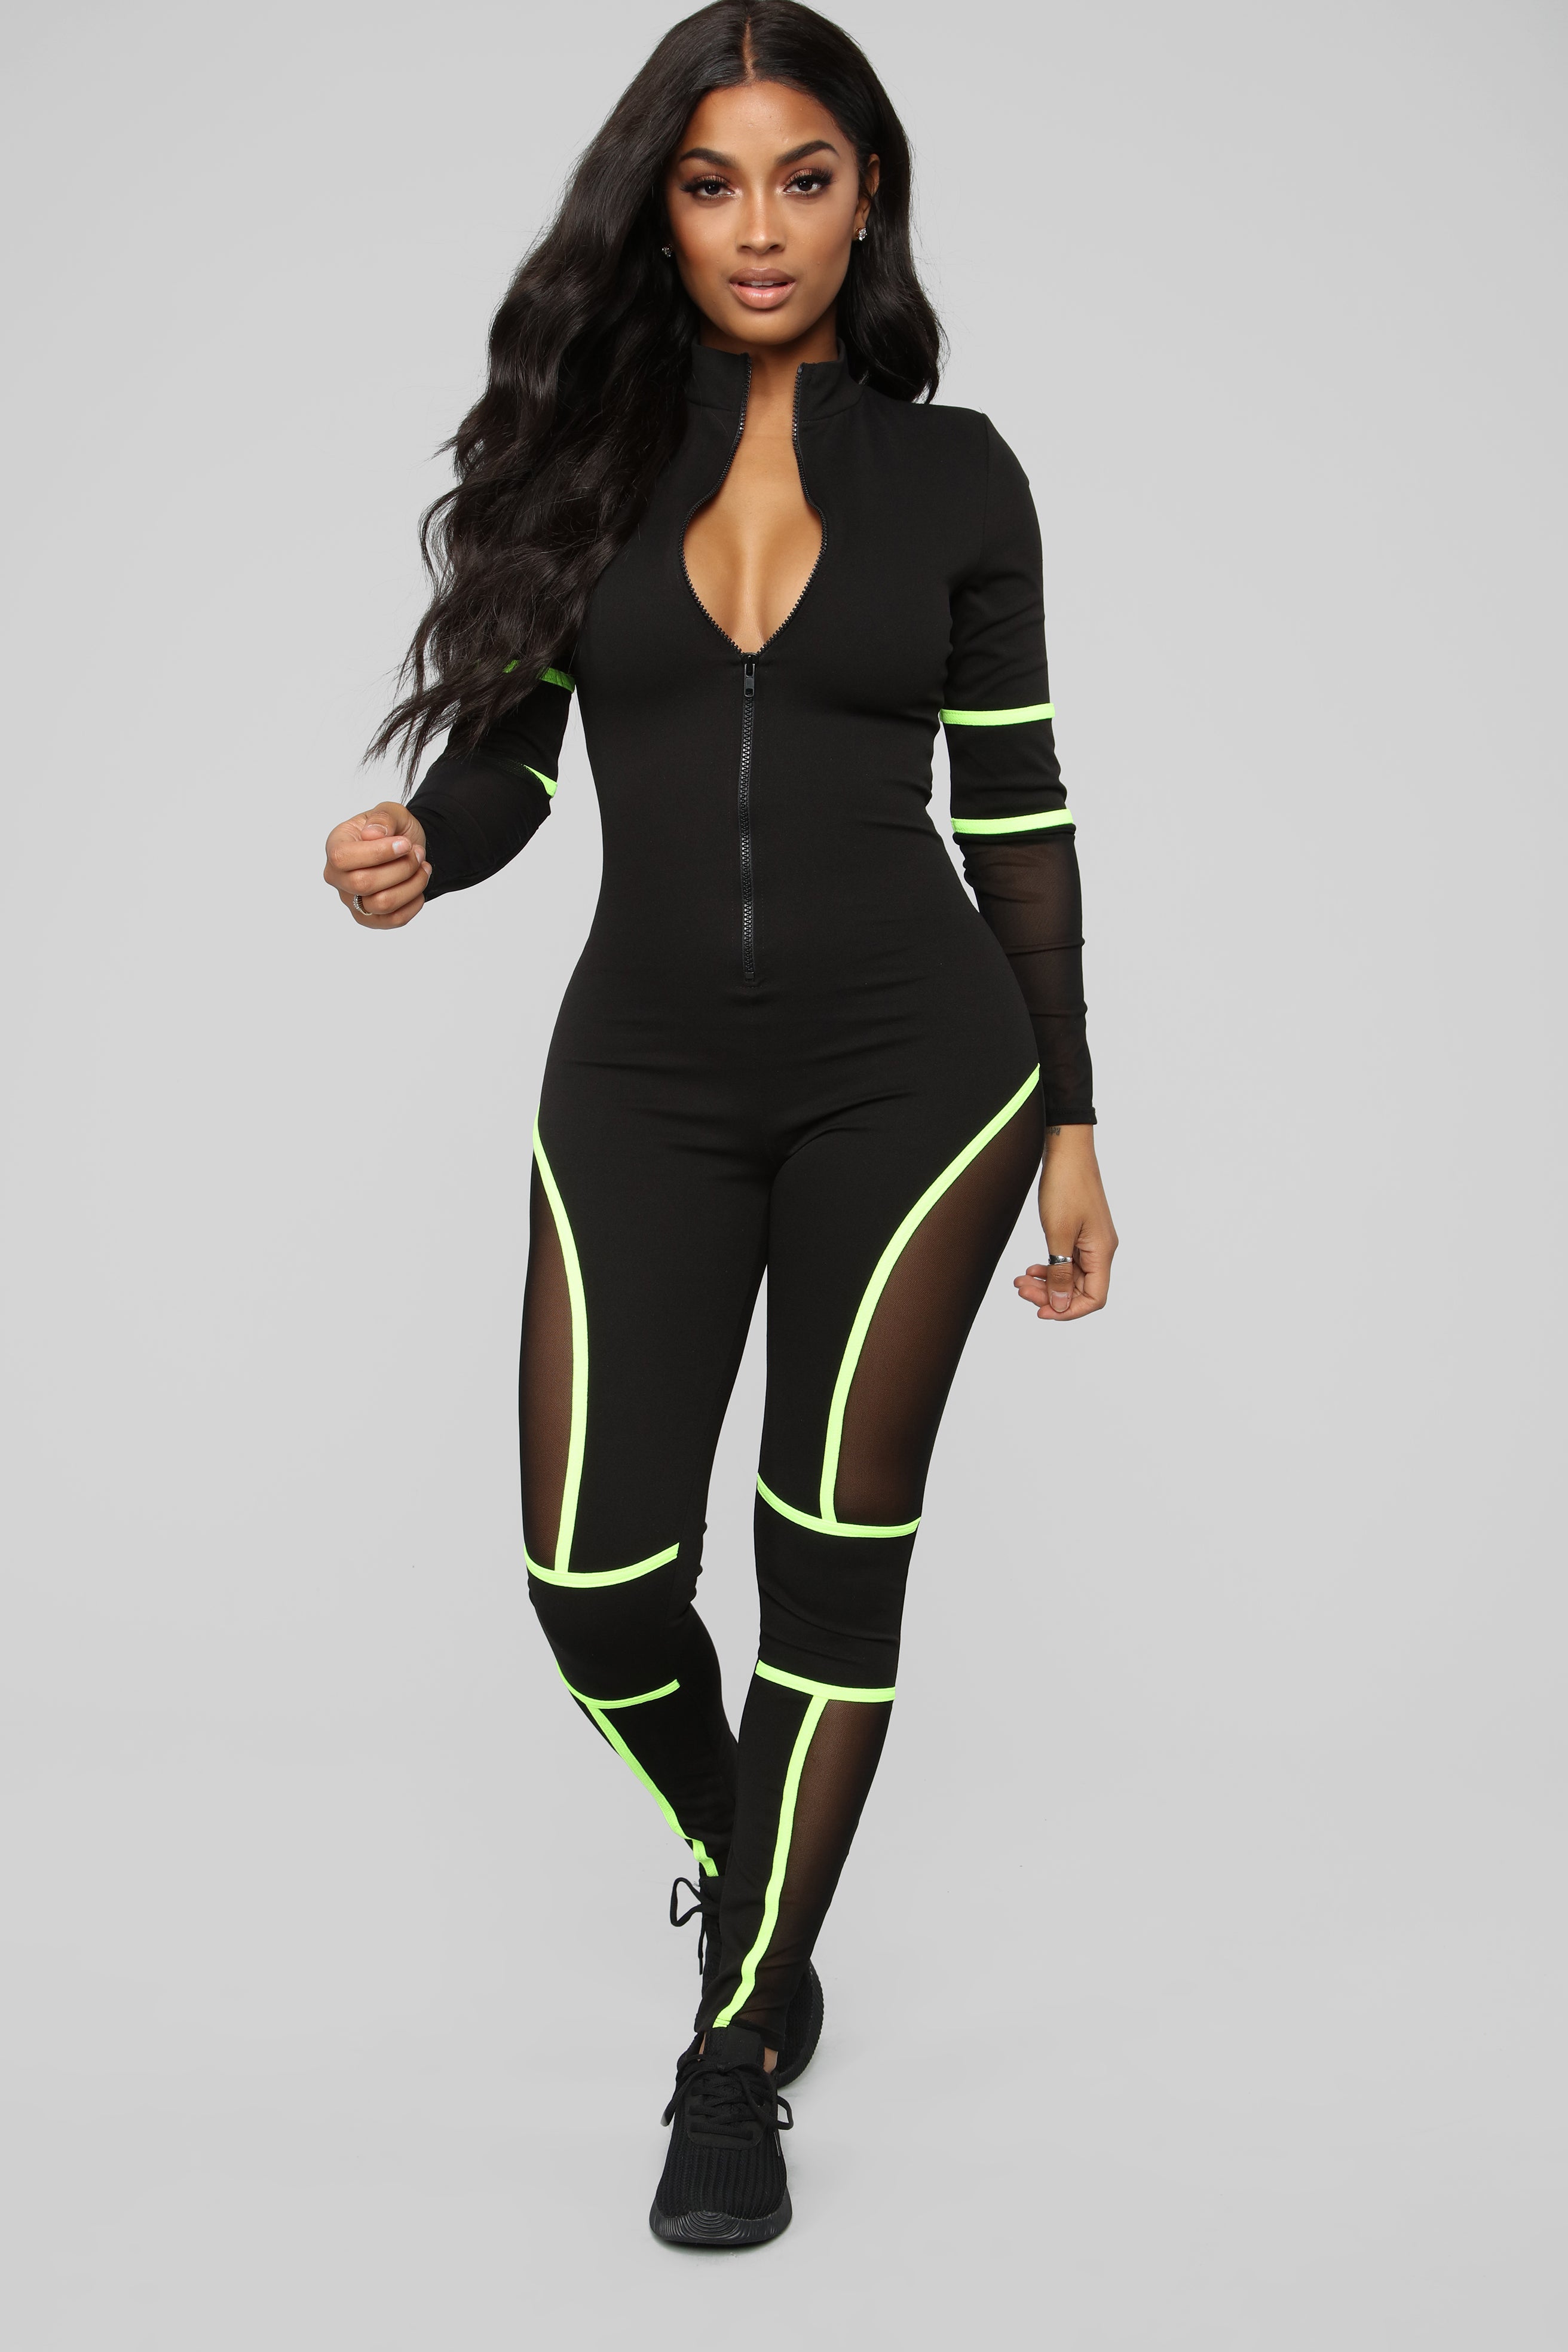 black and green jumpsuit